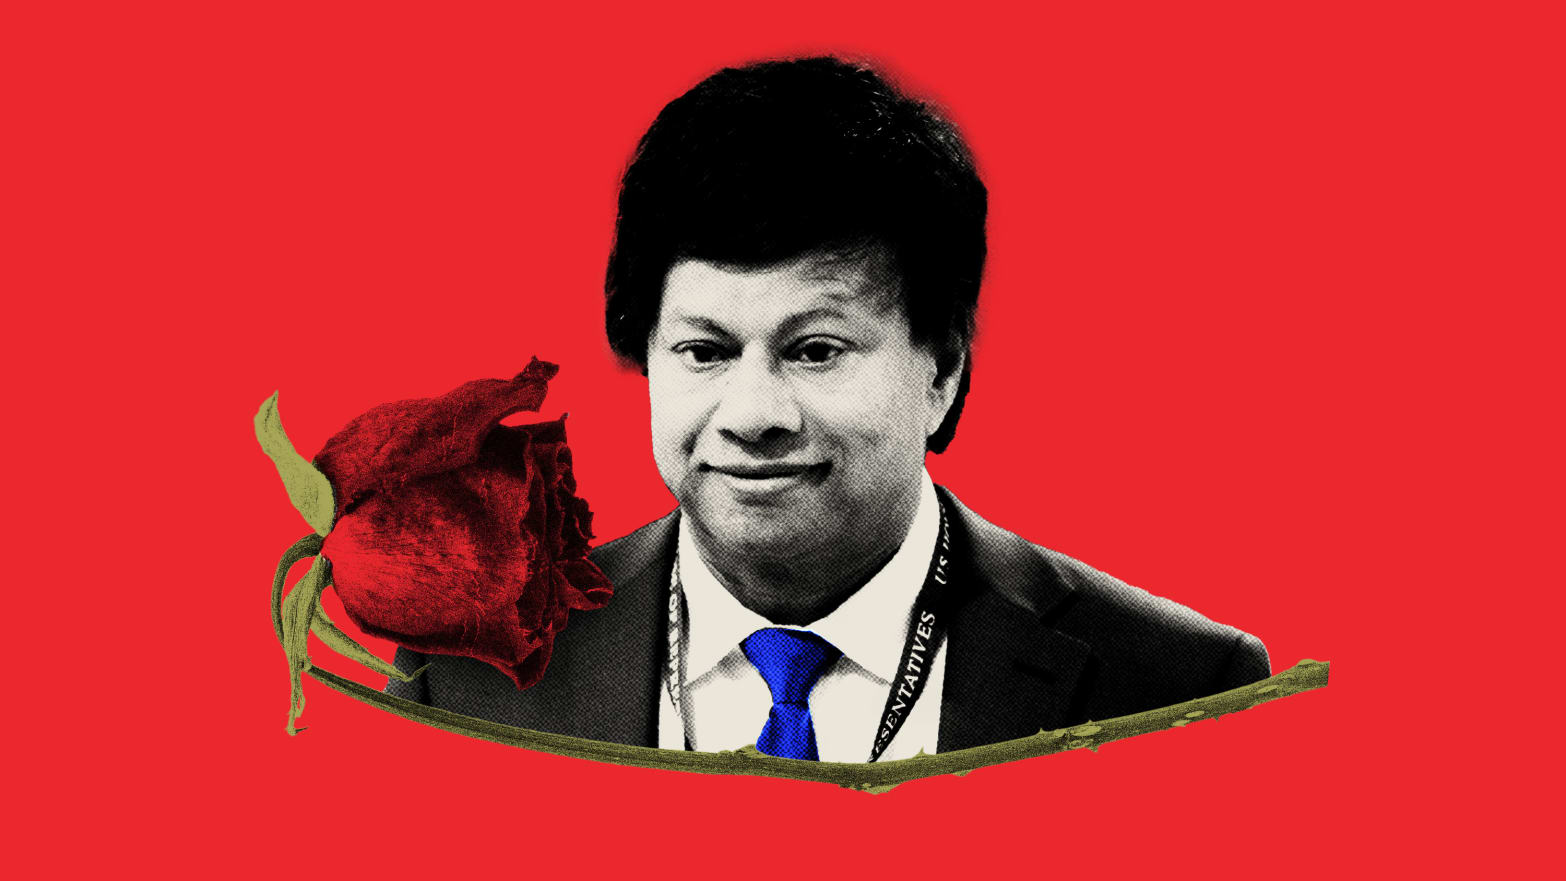 Photo illustration of Shri Thanedar atop a wilted red rose on a red background.